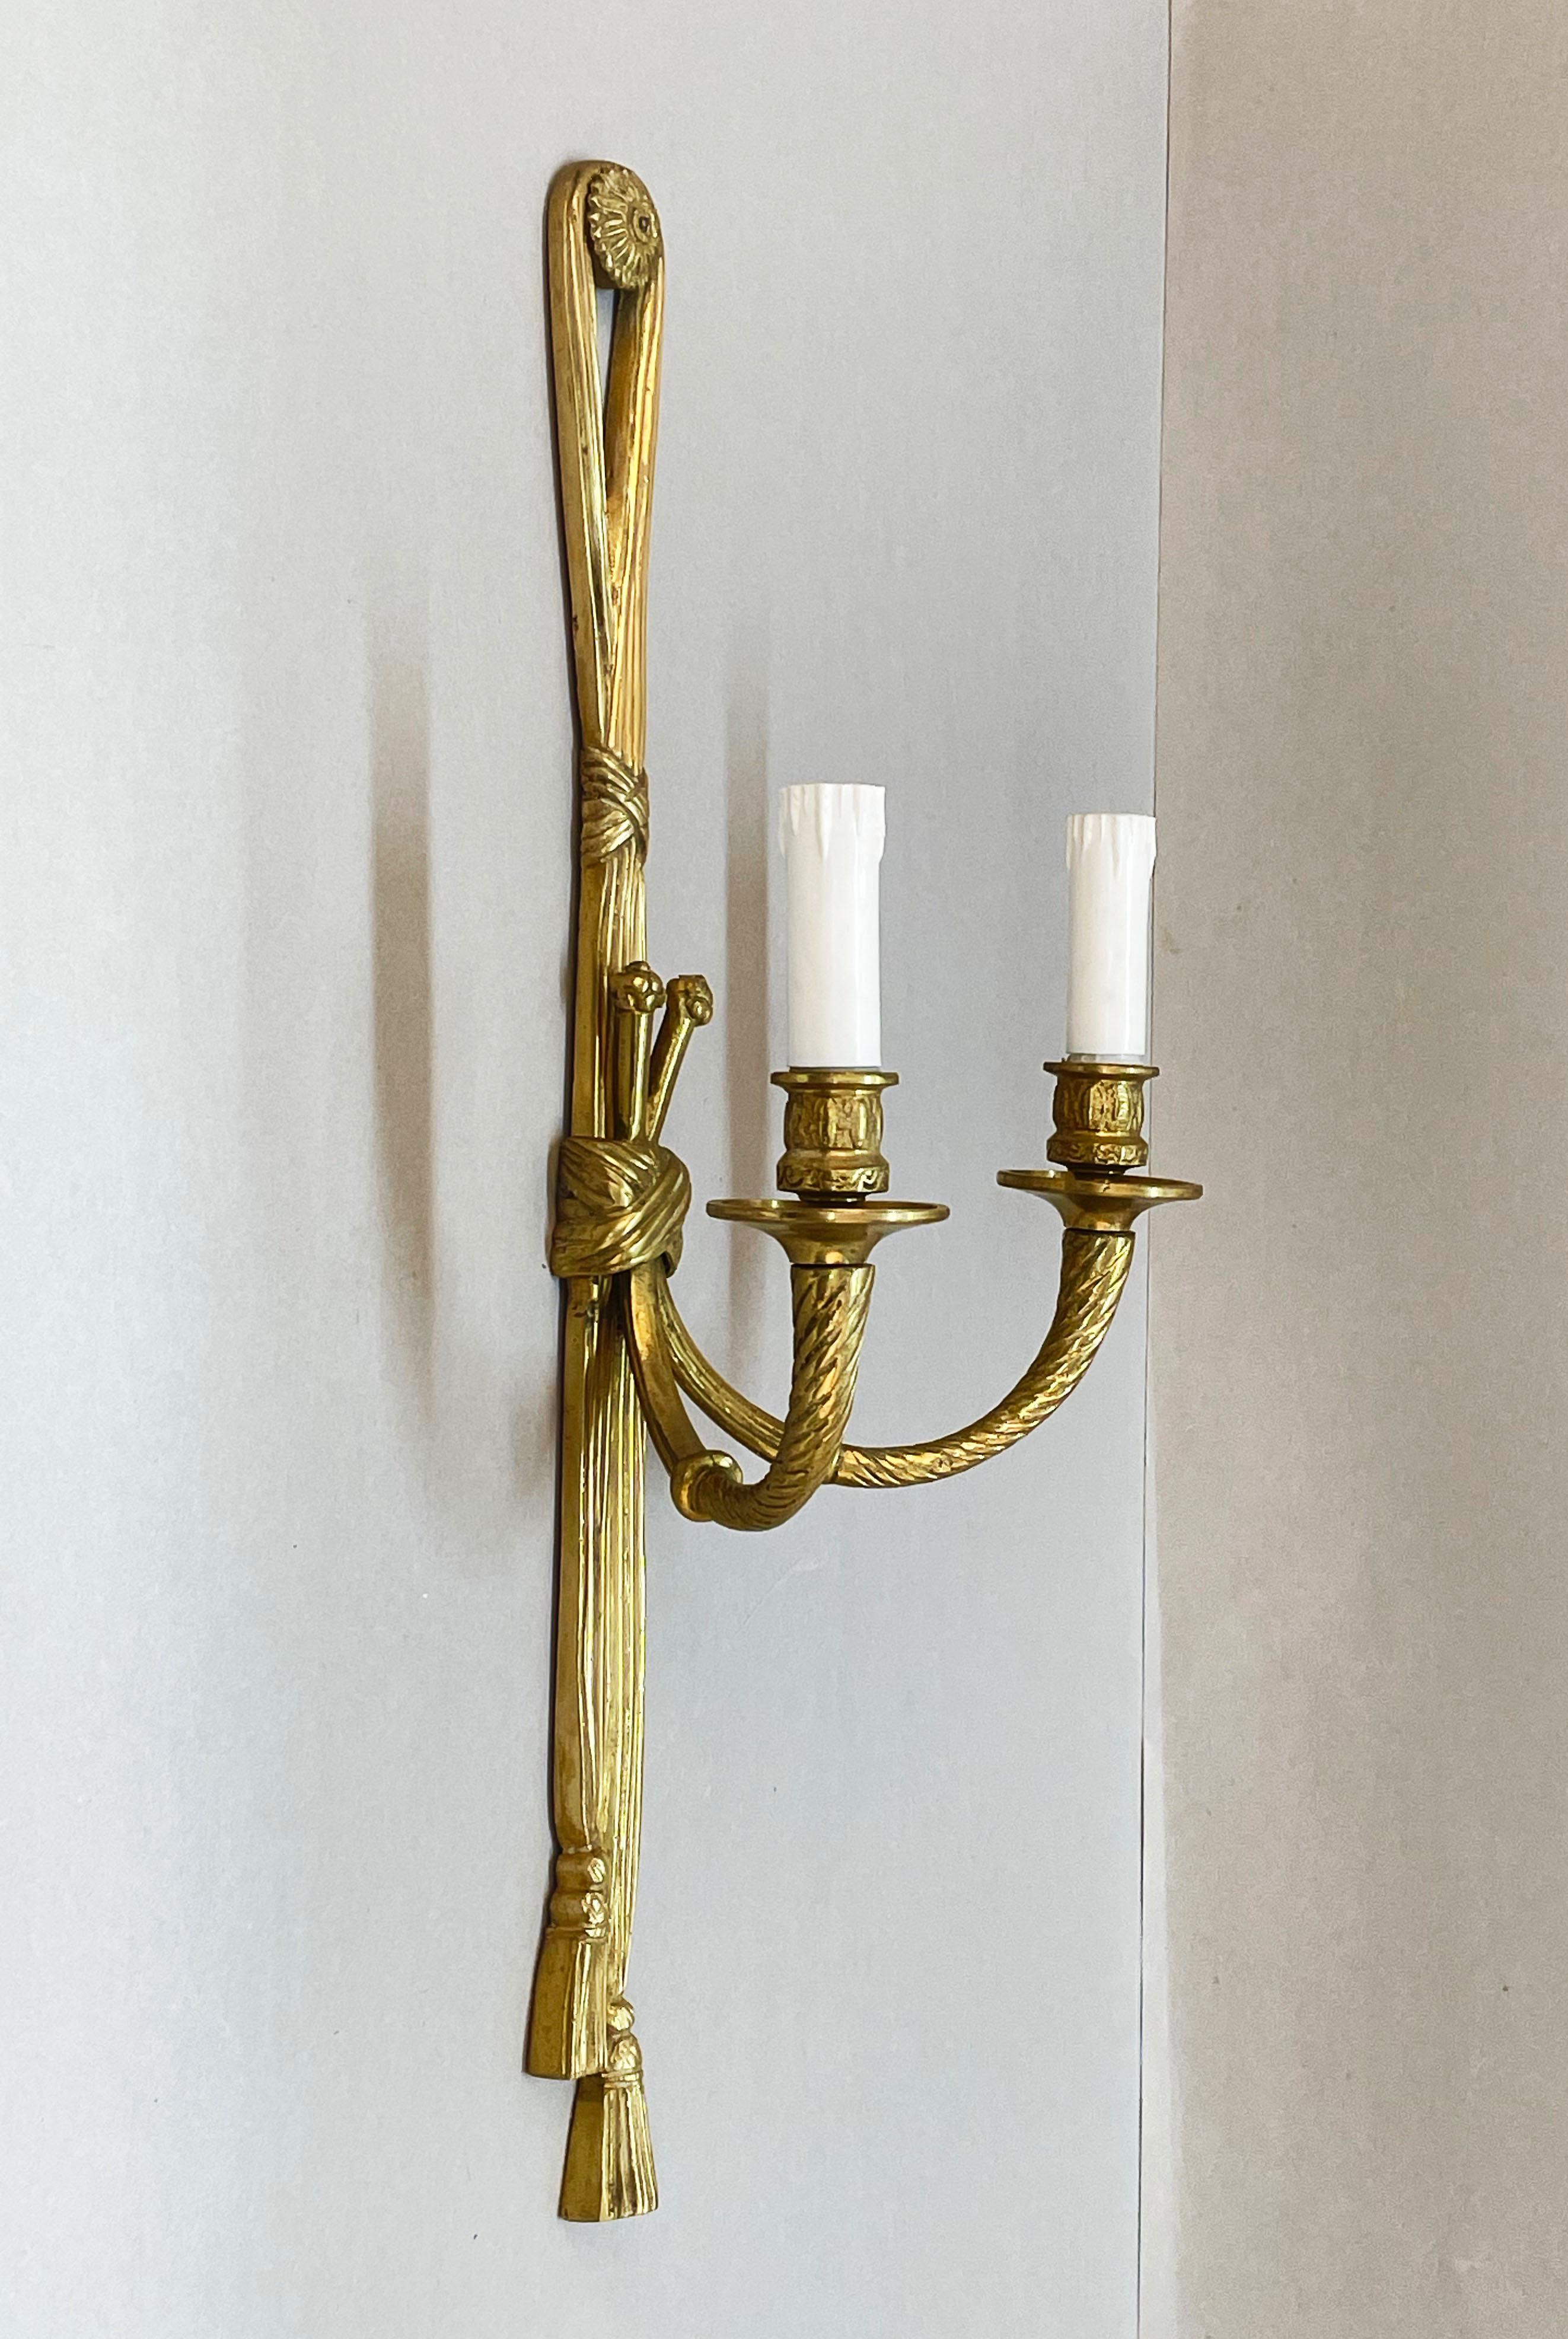 Pair of 19th Century Louis XVI Style Knot & Tassel Appliqué Wall Candle Sconces For Sale 8